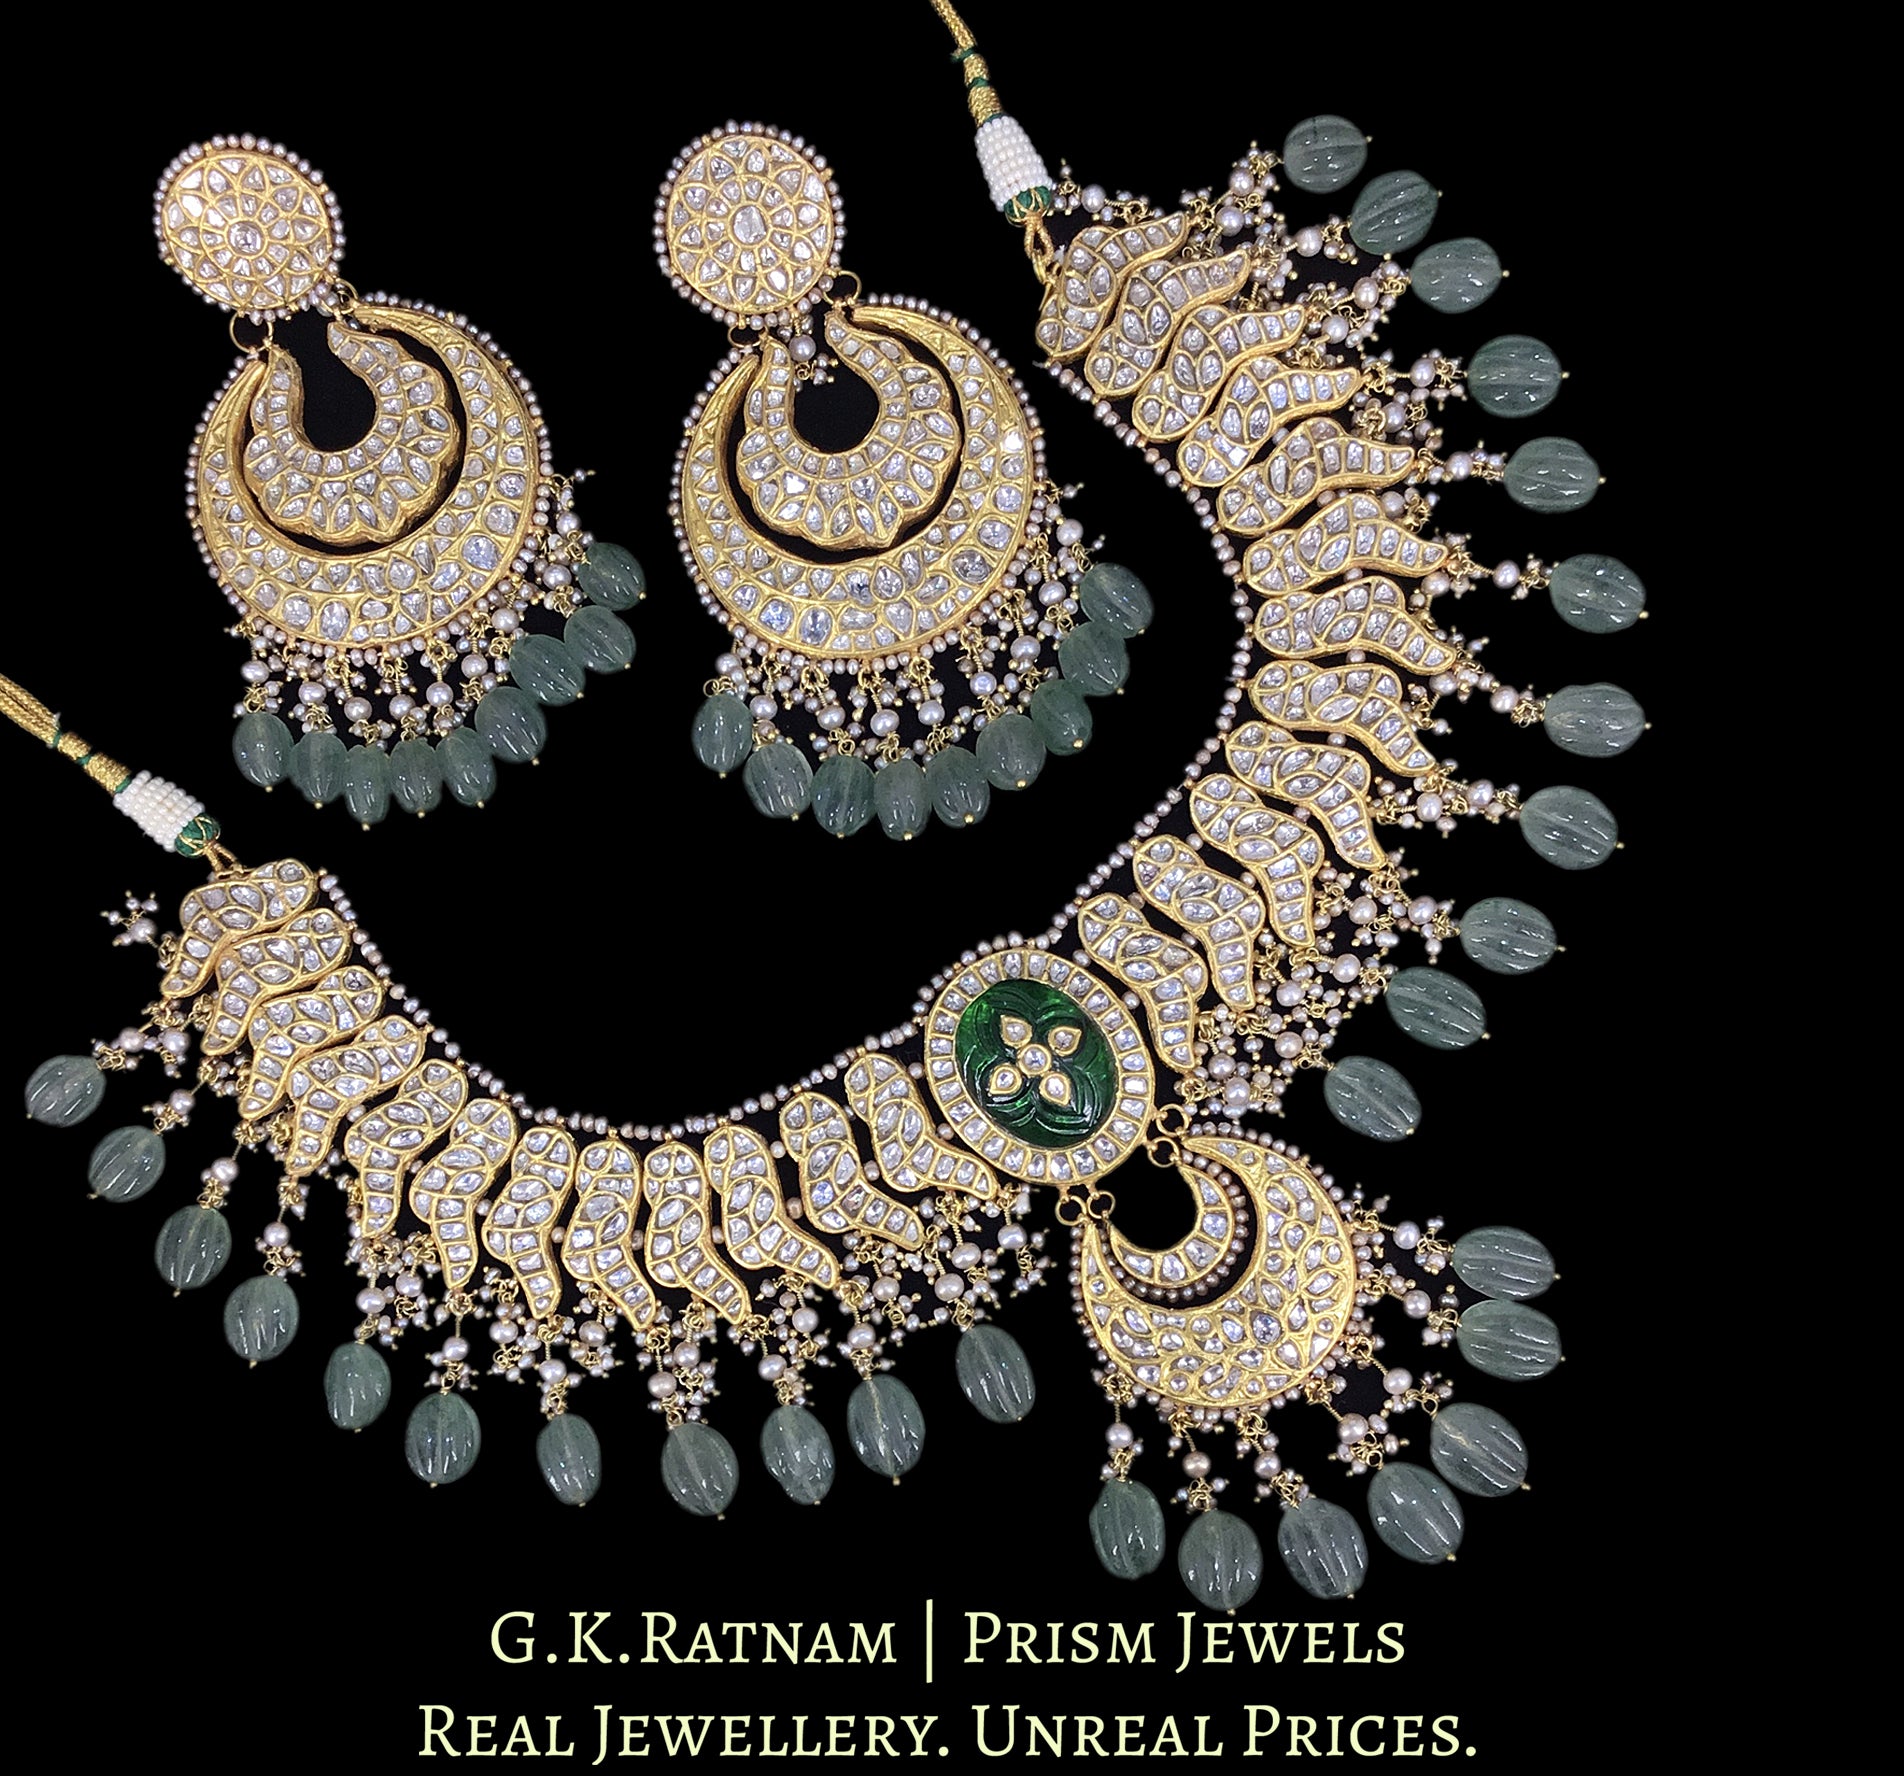 23k Gold and Diamond Polki Necklace Set with basra-like Pearls and hand-carved Melons